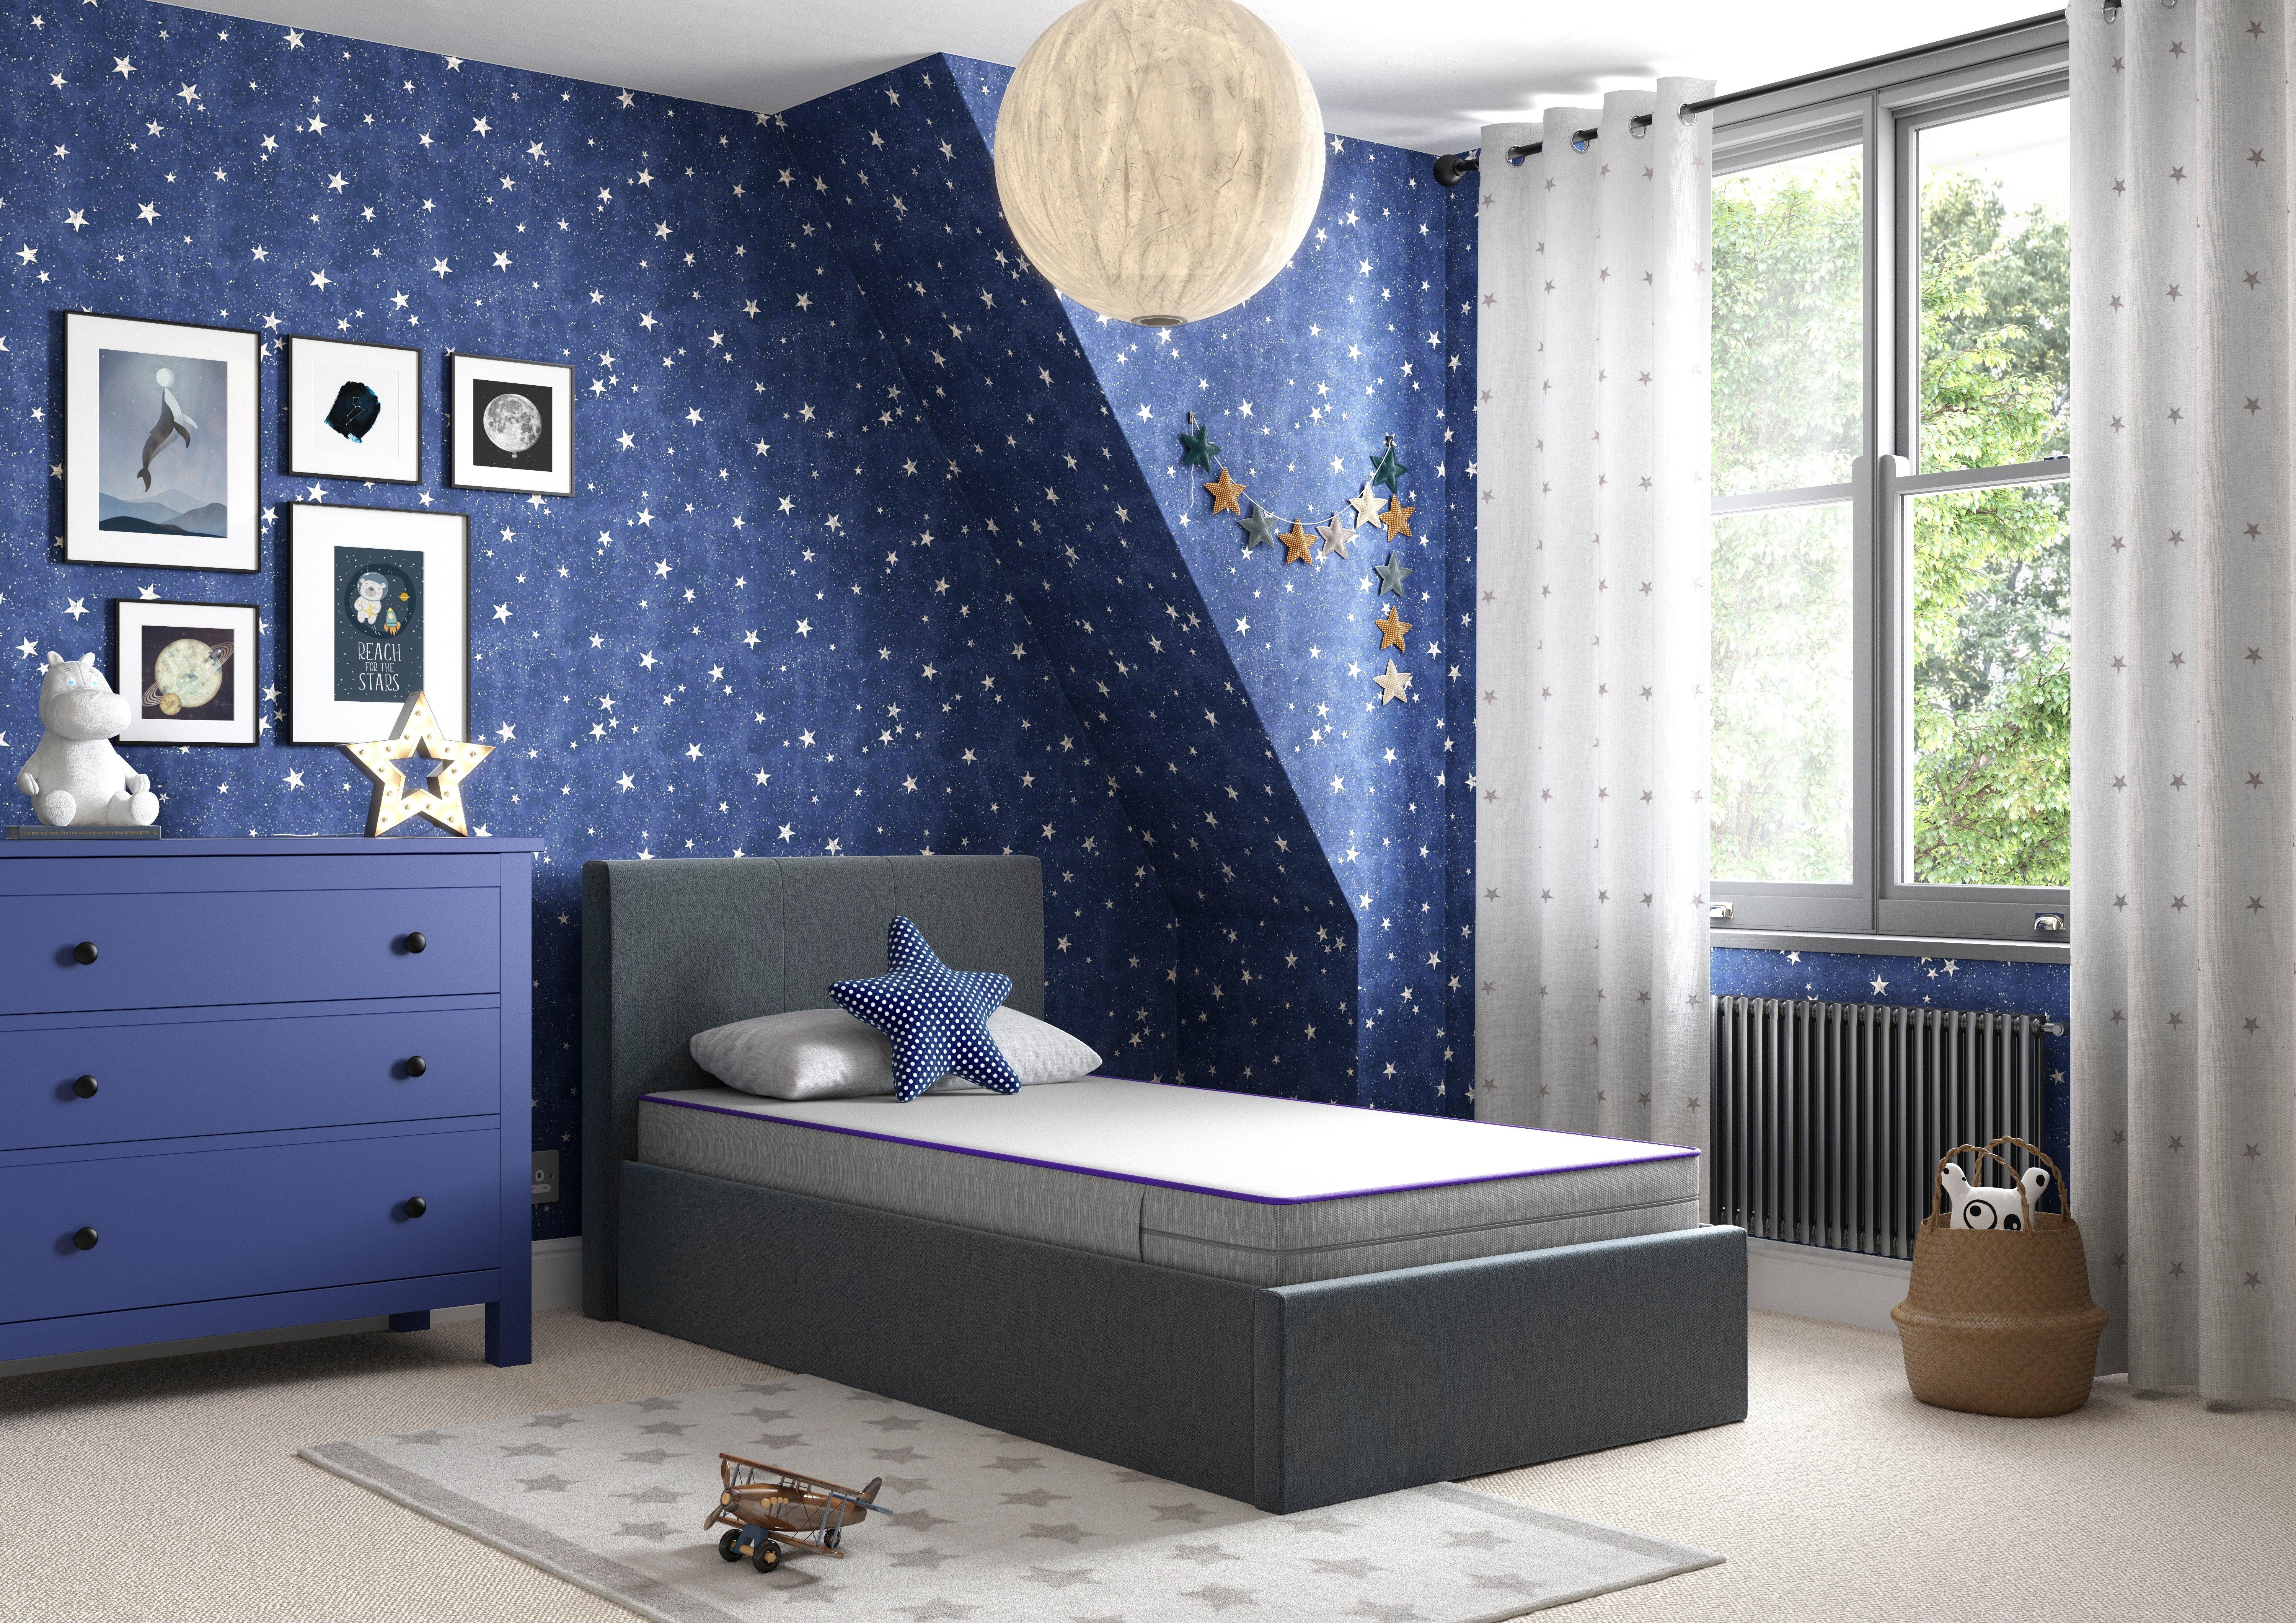 How to update your kids’ bedrooms as they grow